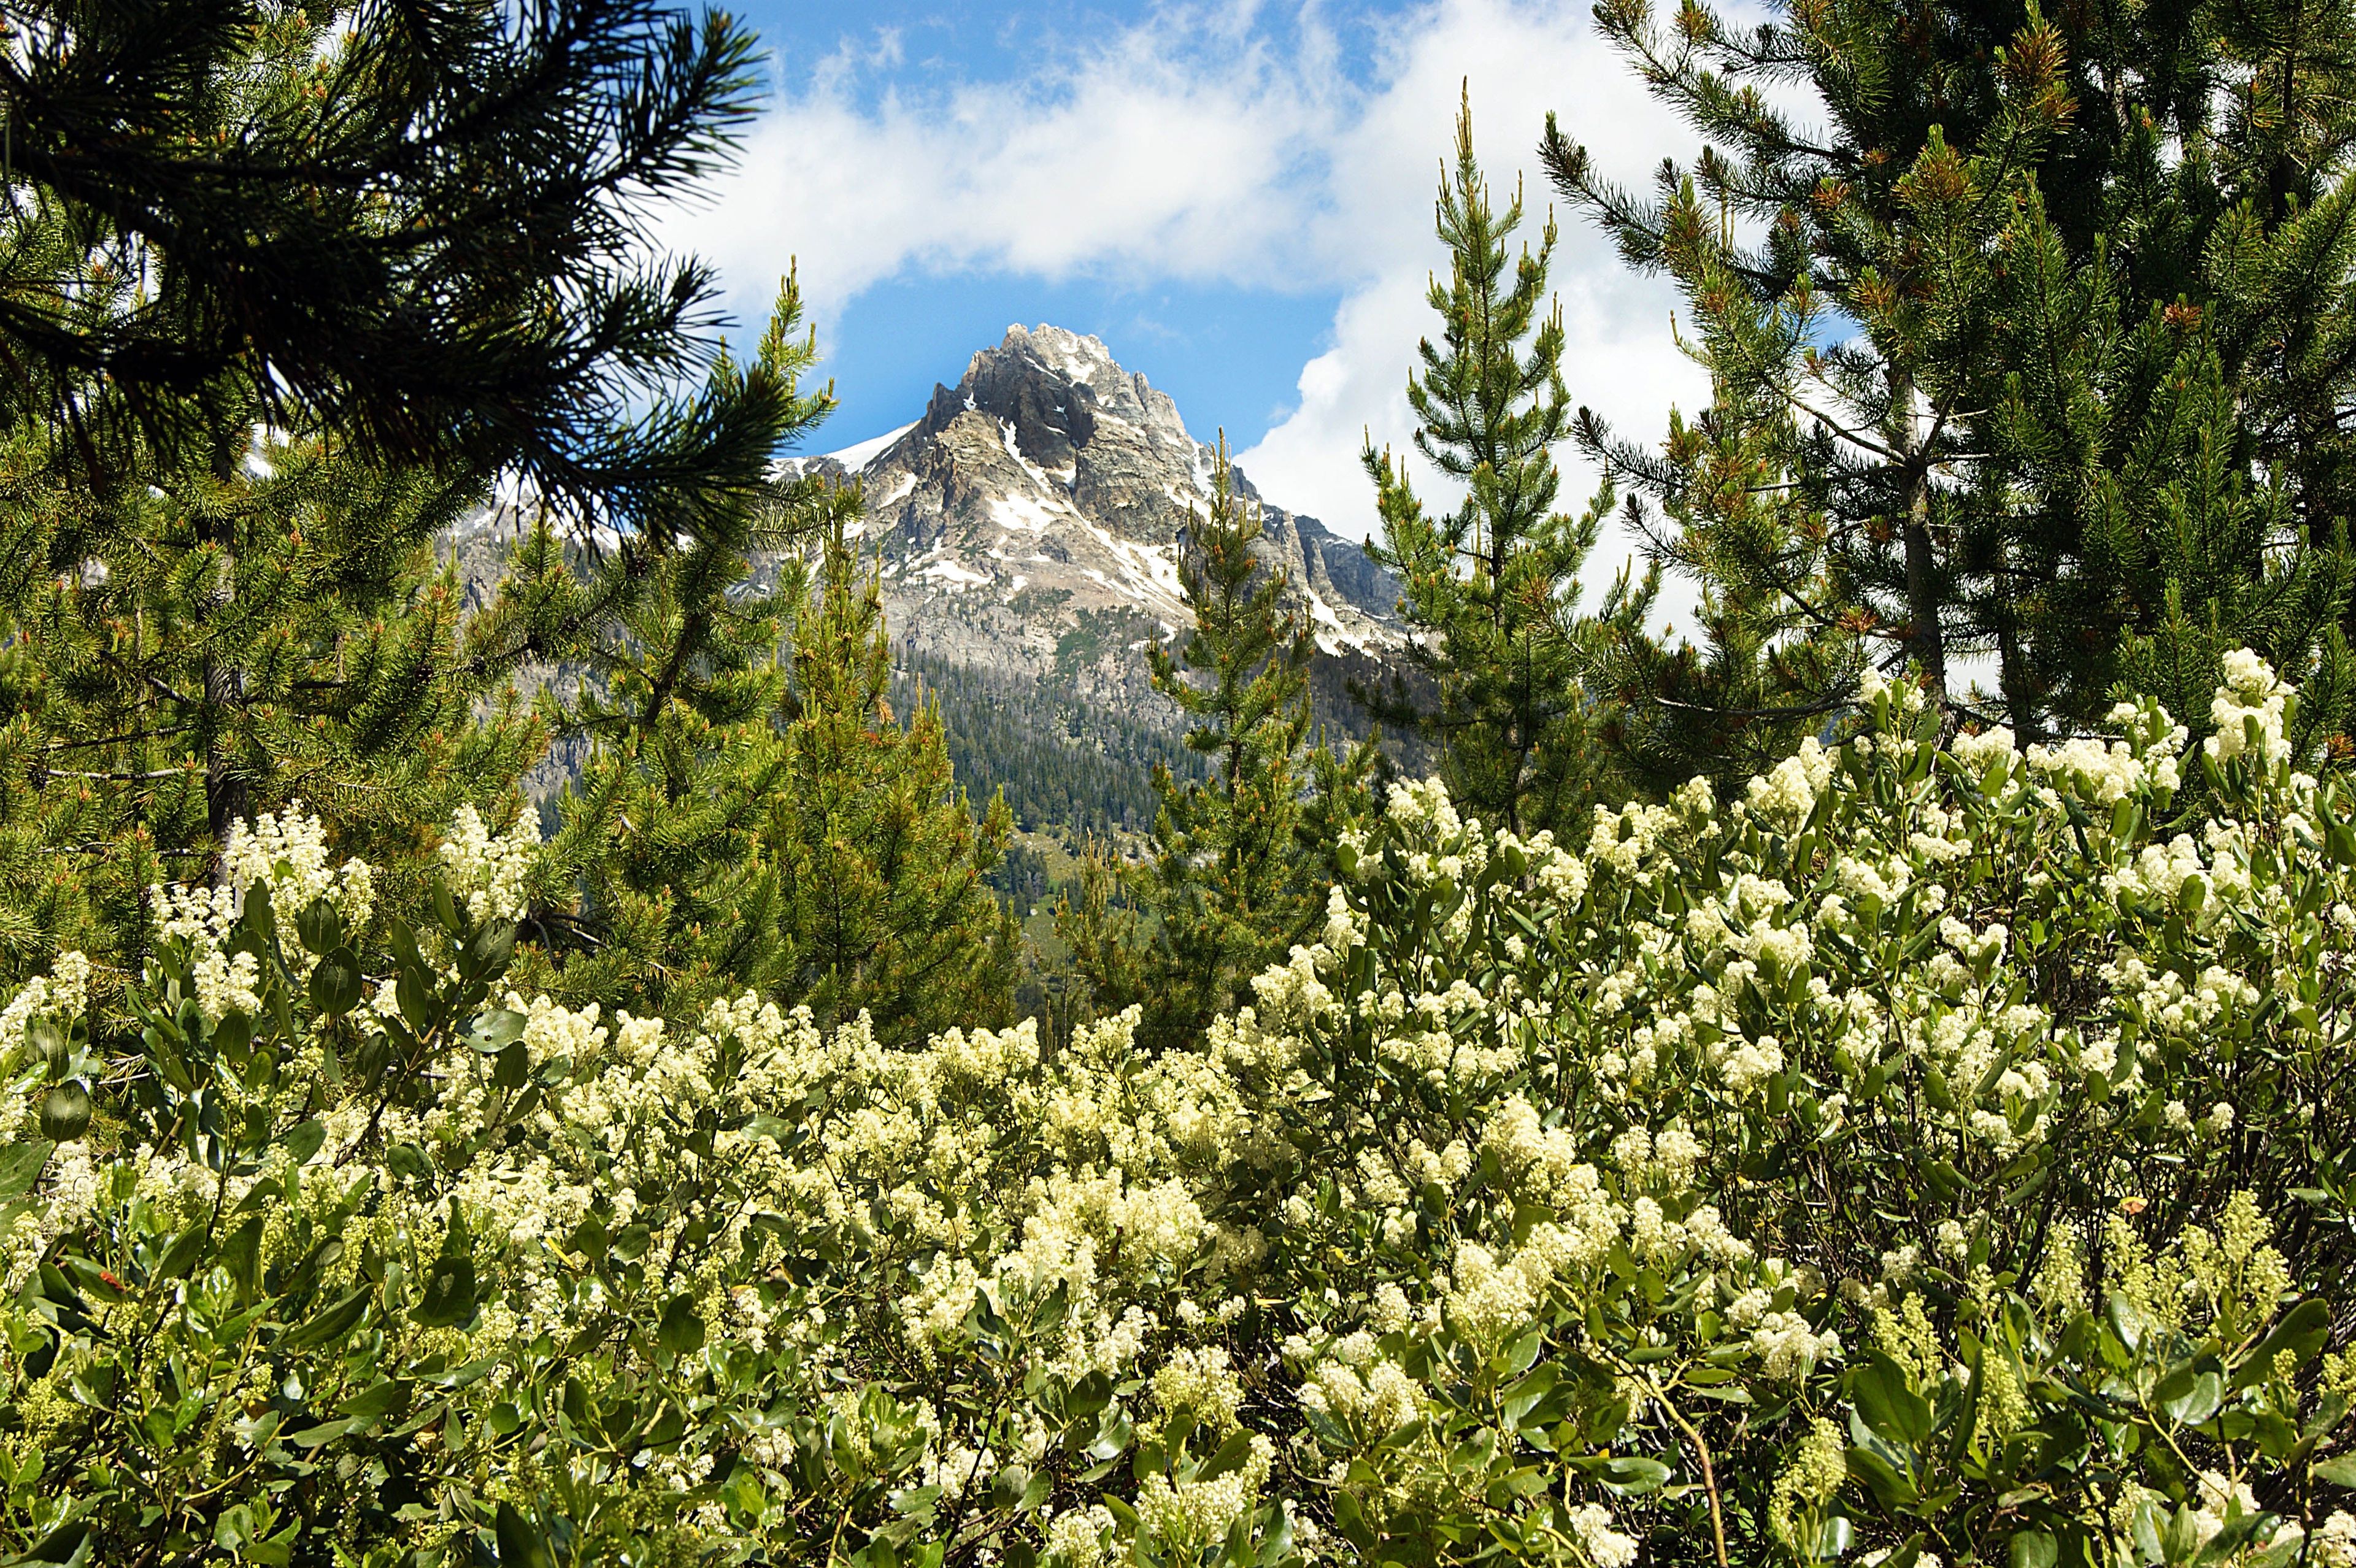 A view of the Grand Teton mountain range, with wildflowers and trees in the foreground.